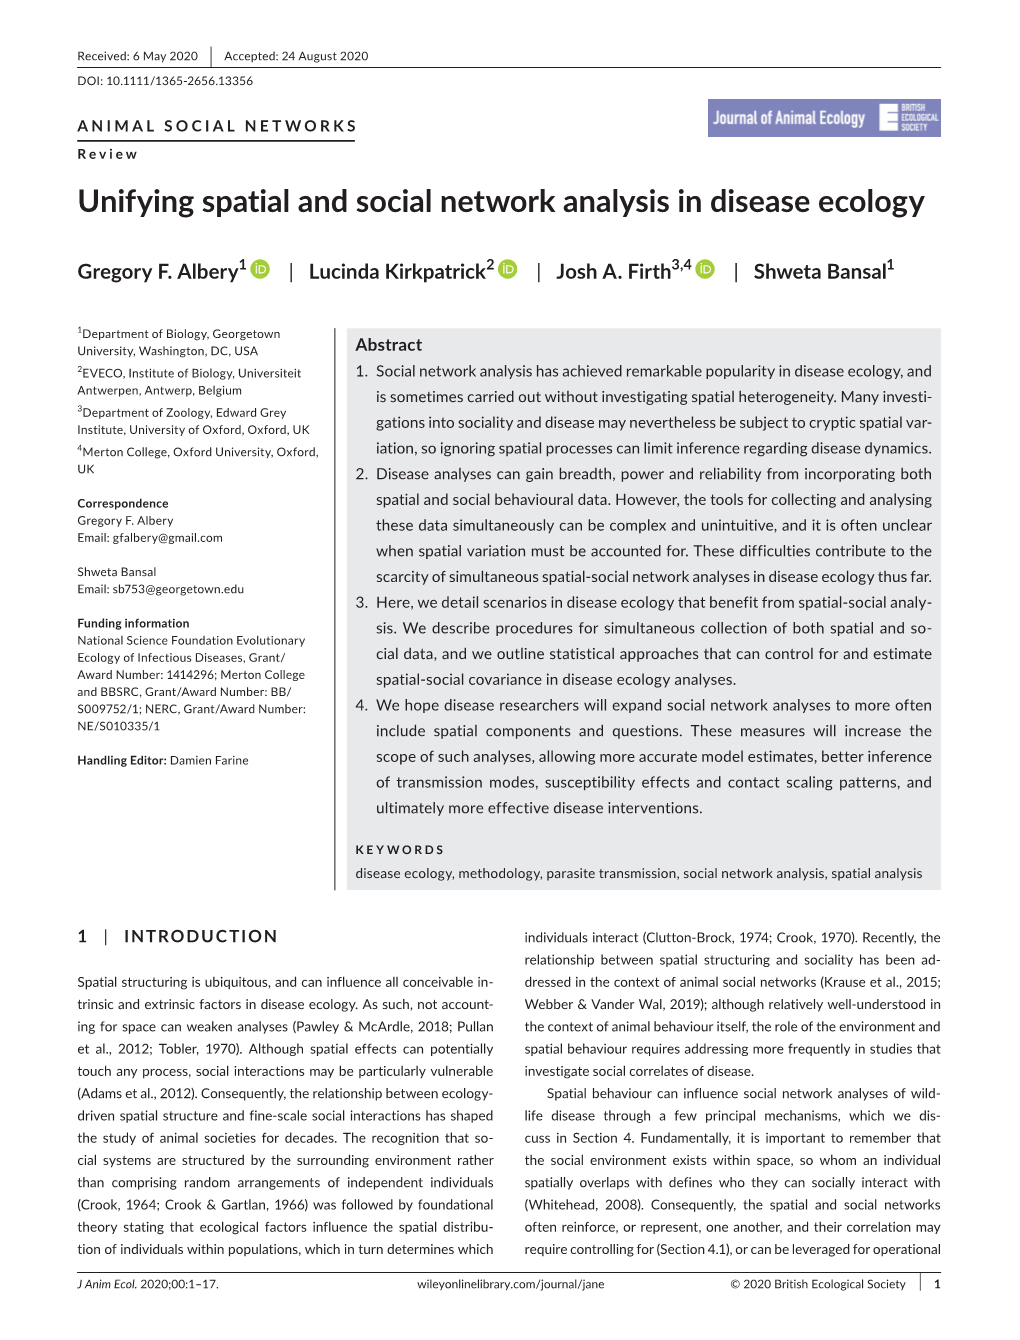 Unifying Spatial and Social Network Analysis in Disease Ecology